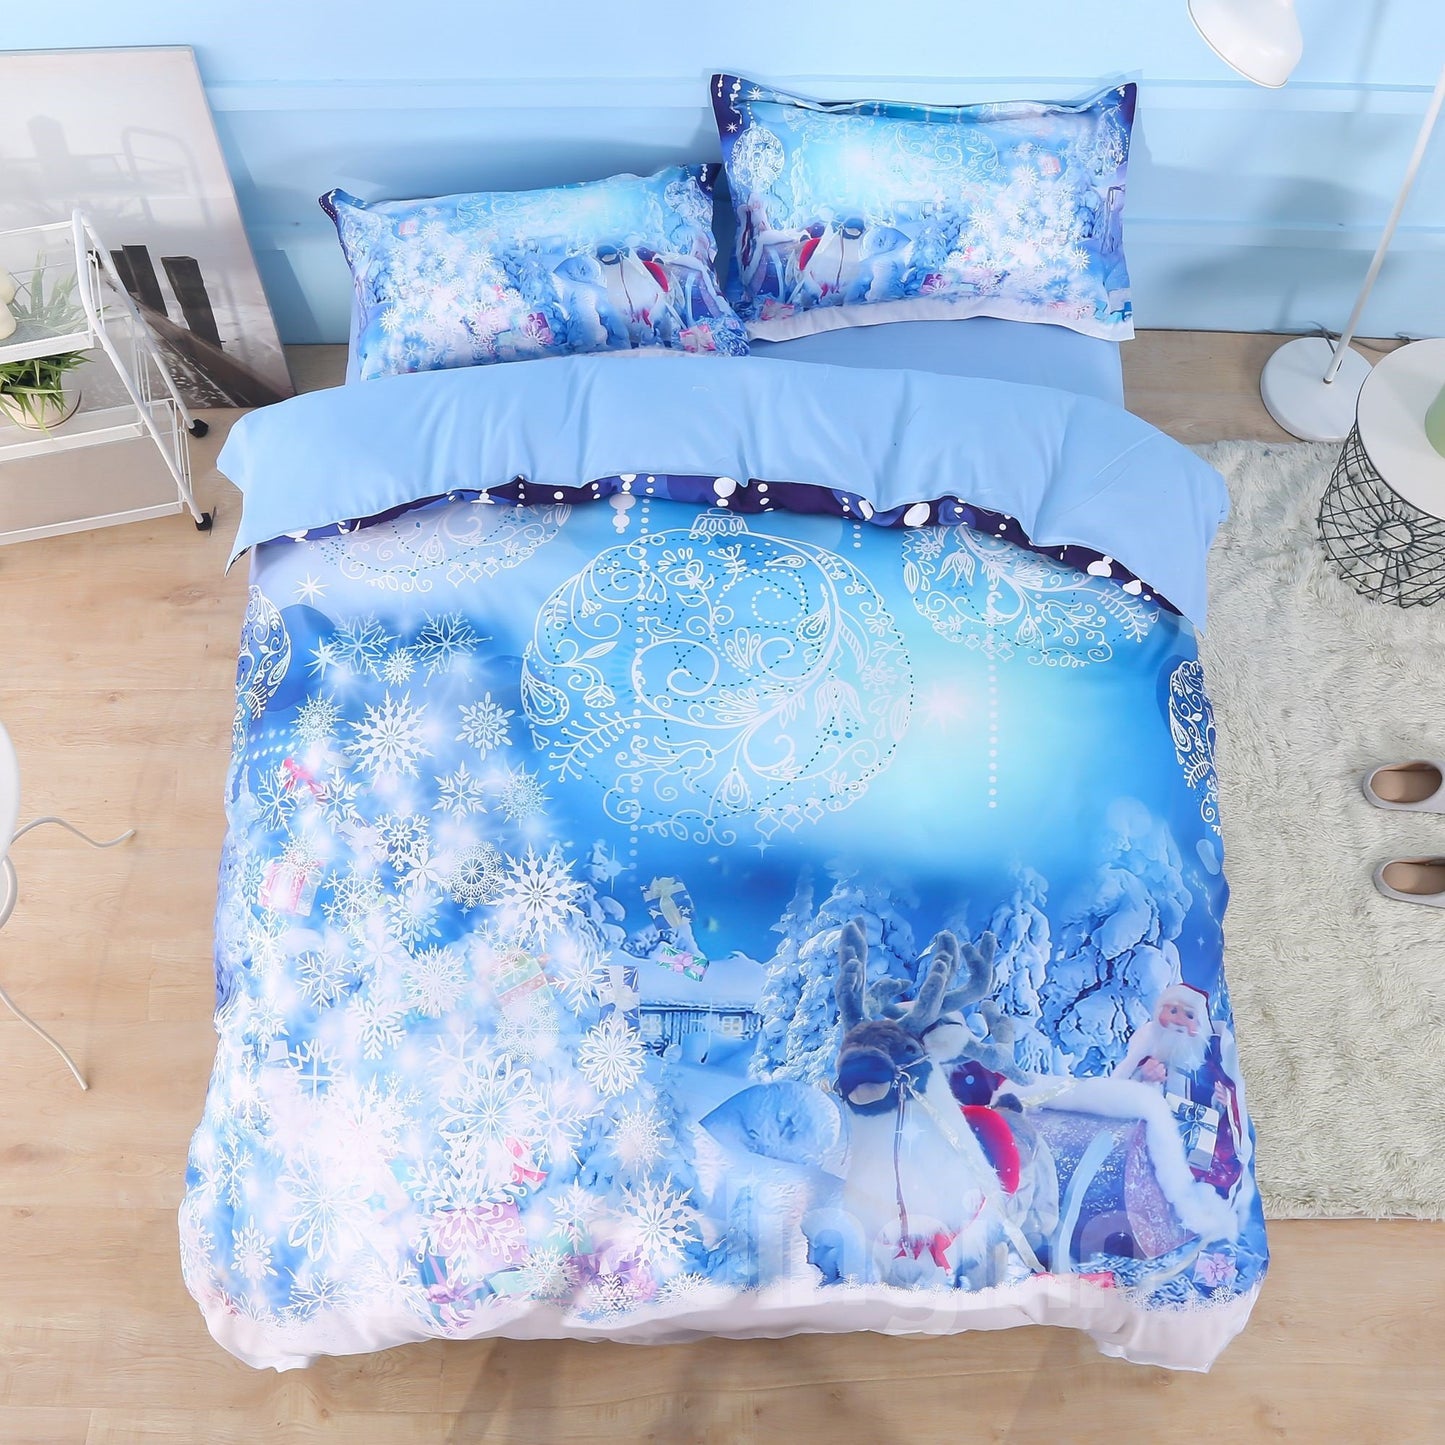 Santa Claus and Christmas Ornaments Bedding Set 3D Blue 4-Piece Duvet Cover Set Happy New Year Colorfast Wear-resistant Endurable Skin-friendly Polyester All-Season